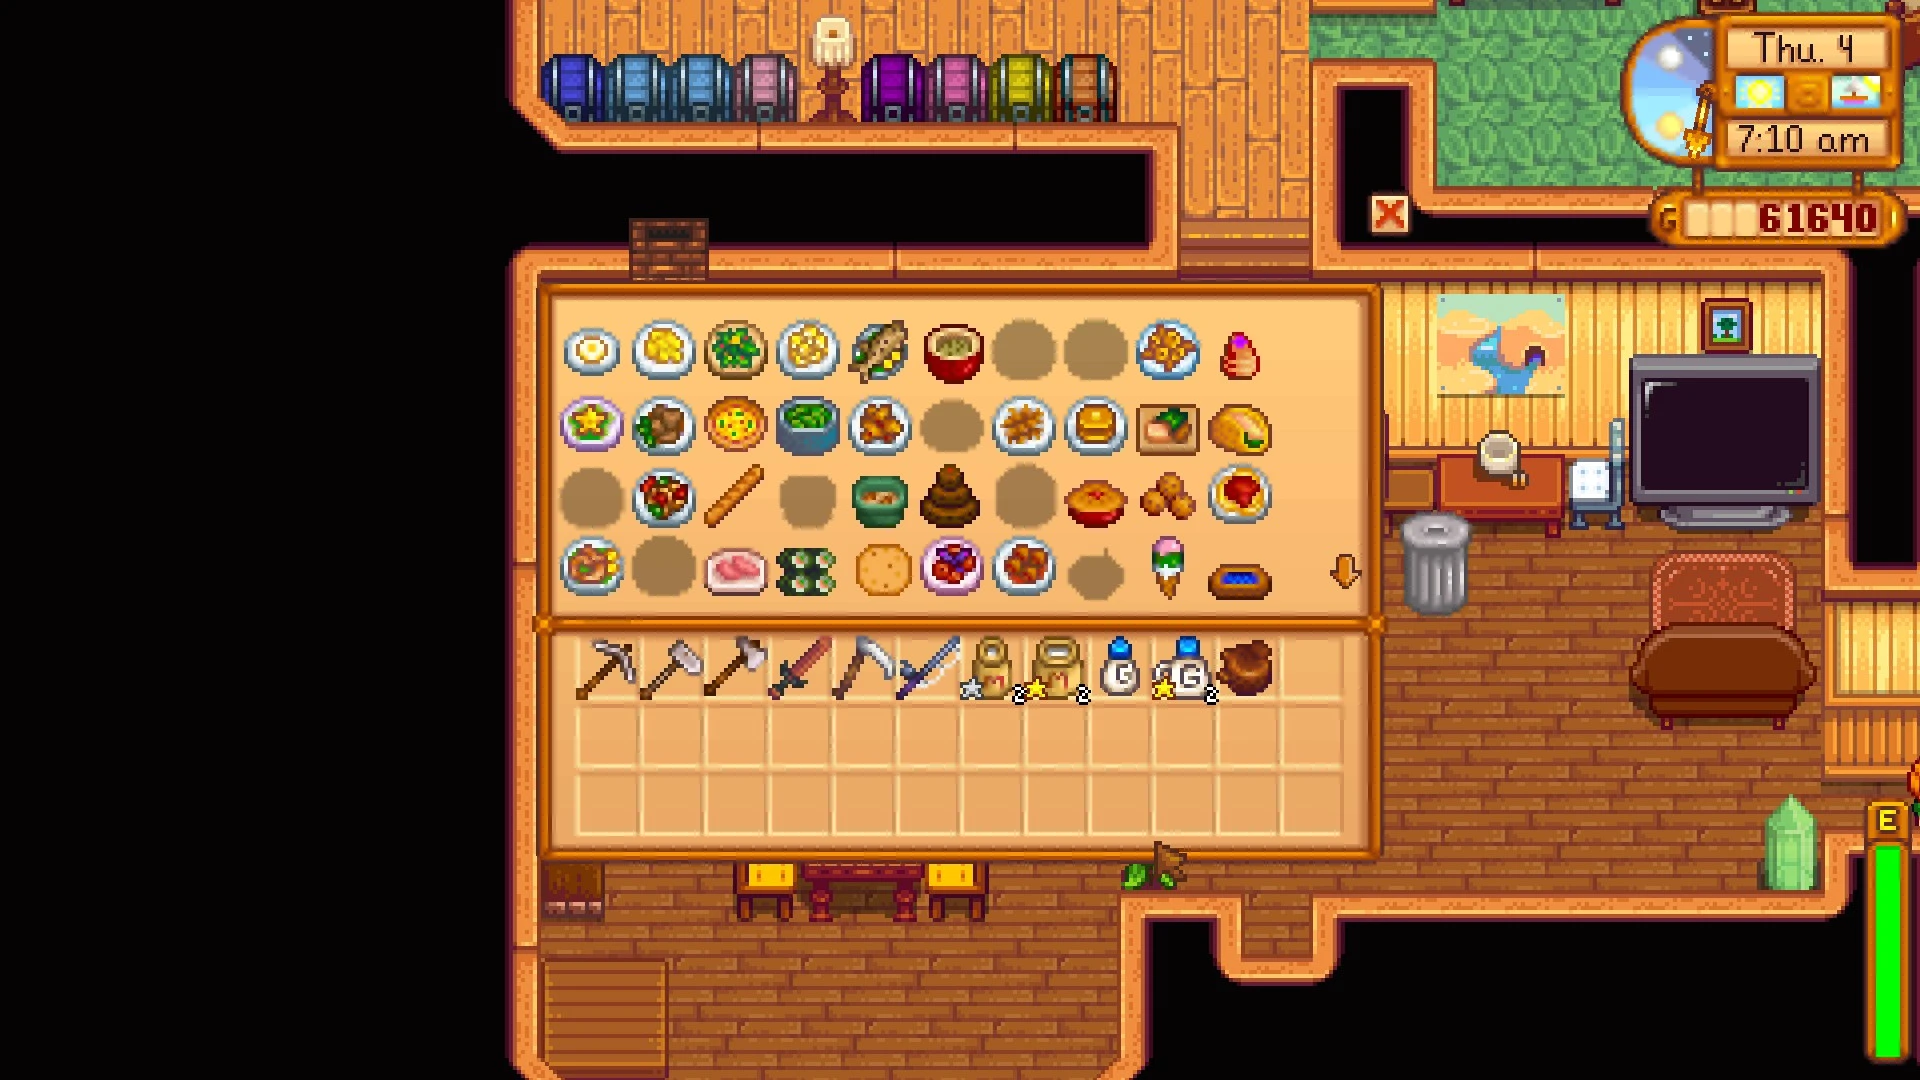 Remote Fridge Storage - Use cooking ingredients from chests at Stardew.